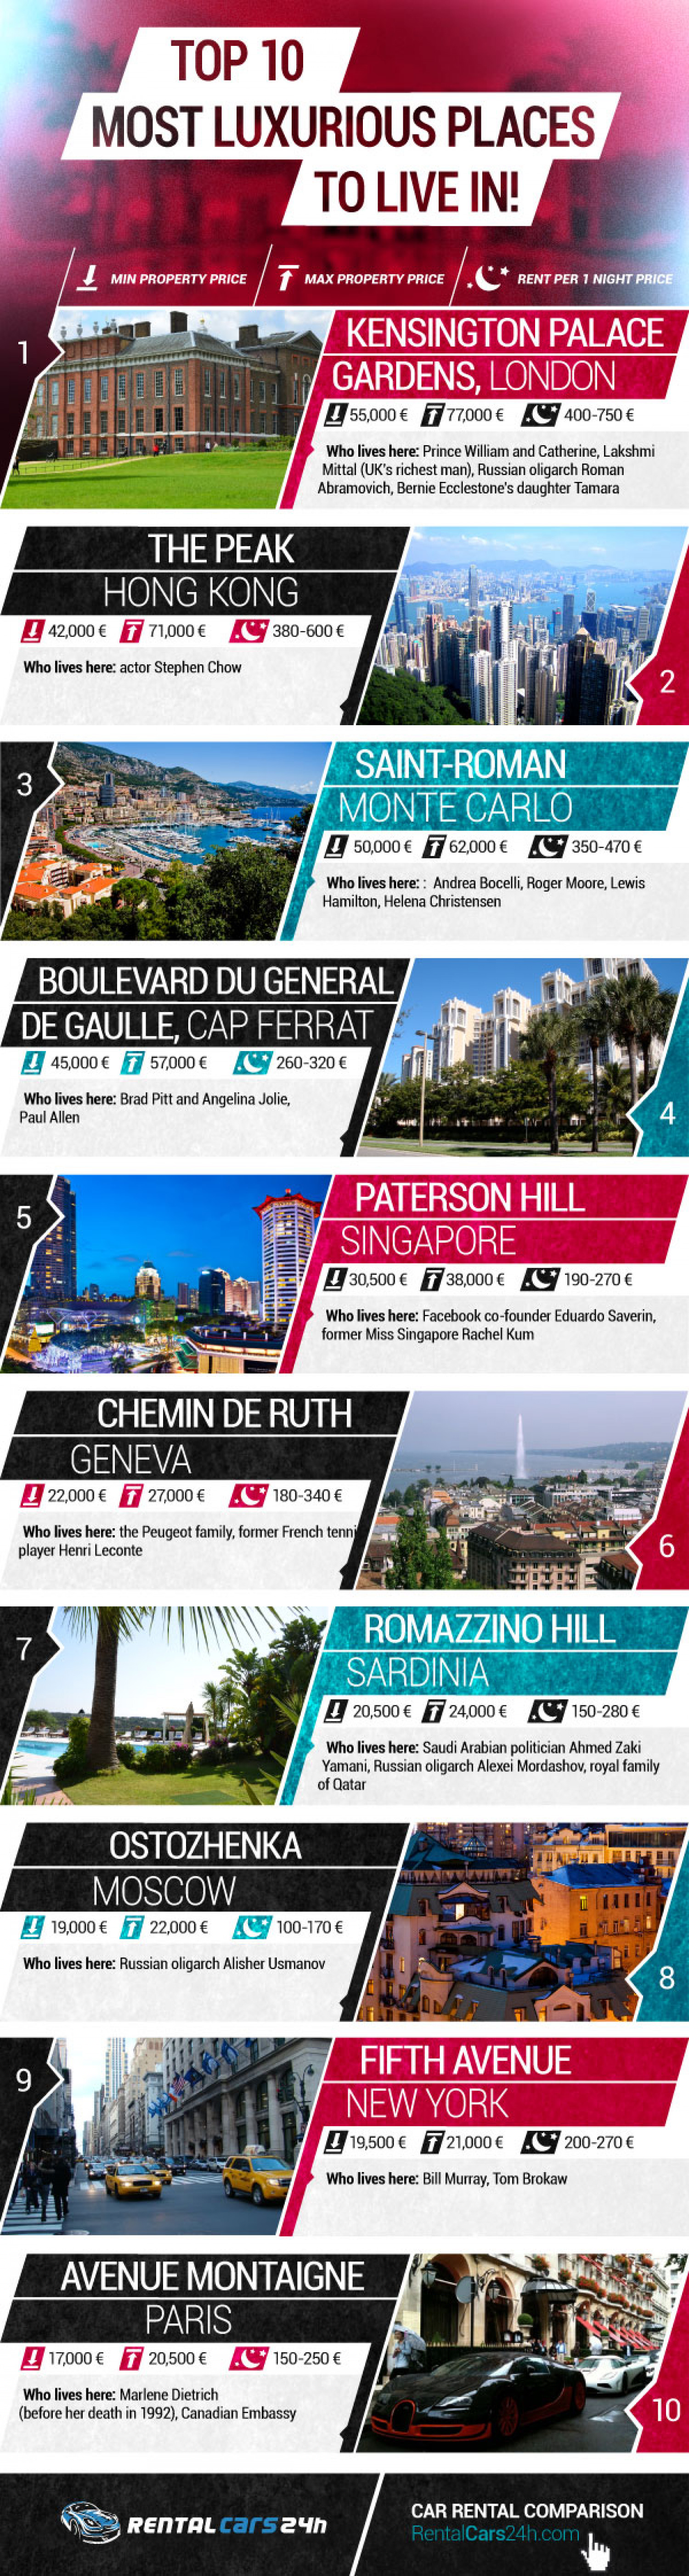 TOP 10 Most Luxurious Places To Live In! Infographic